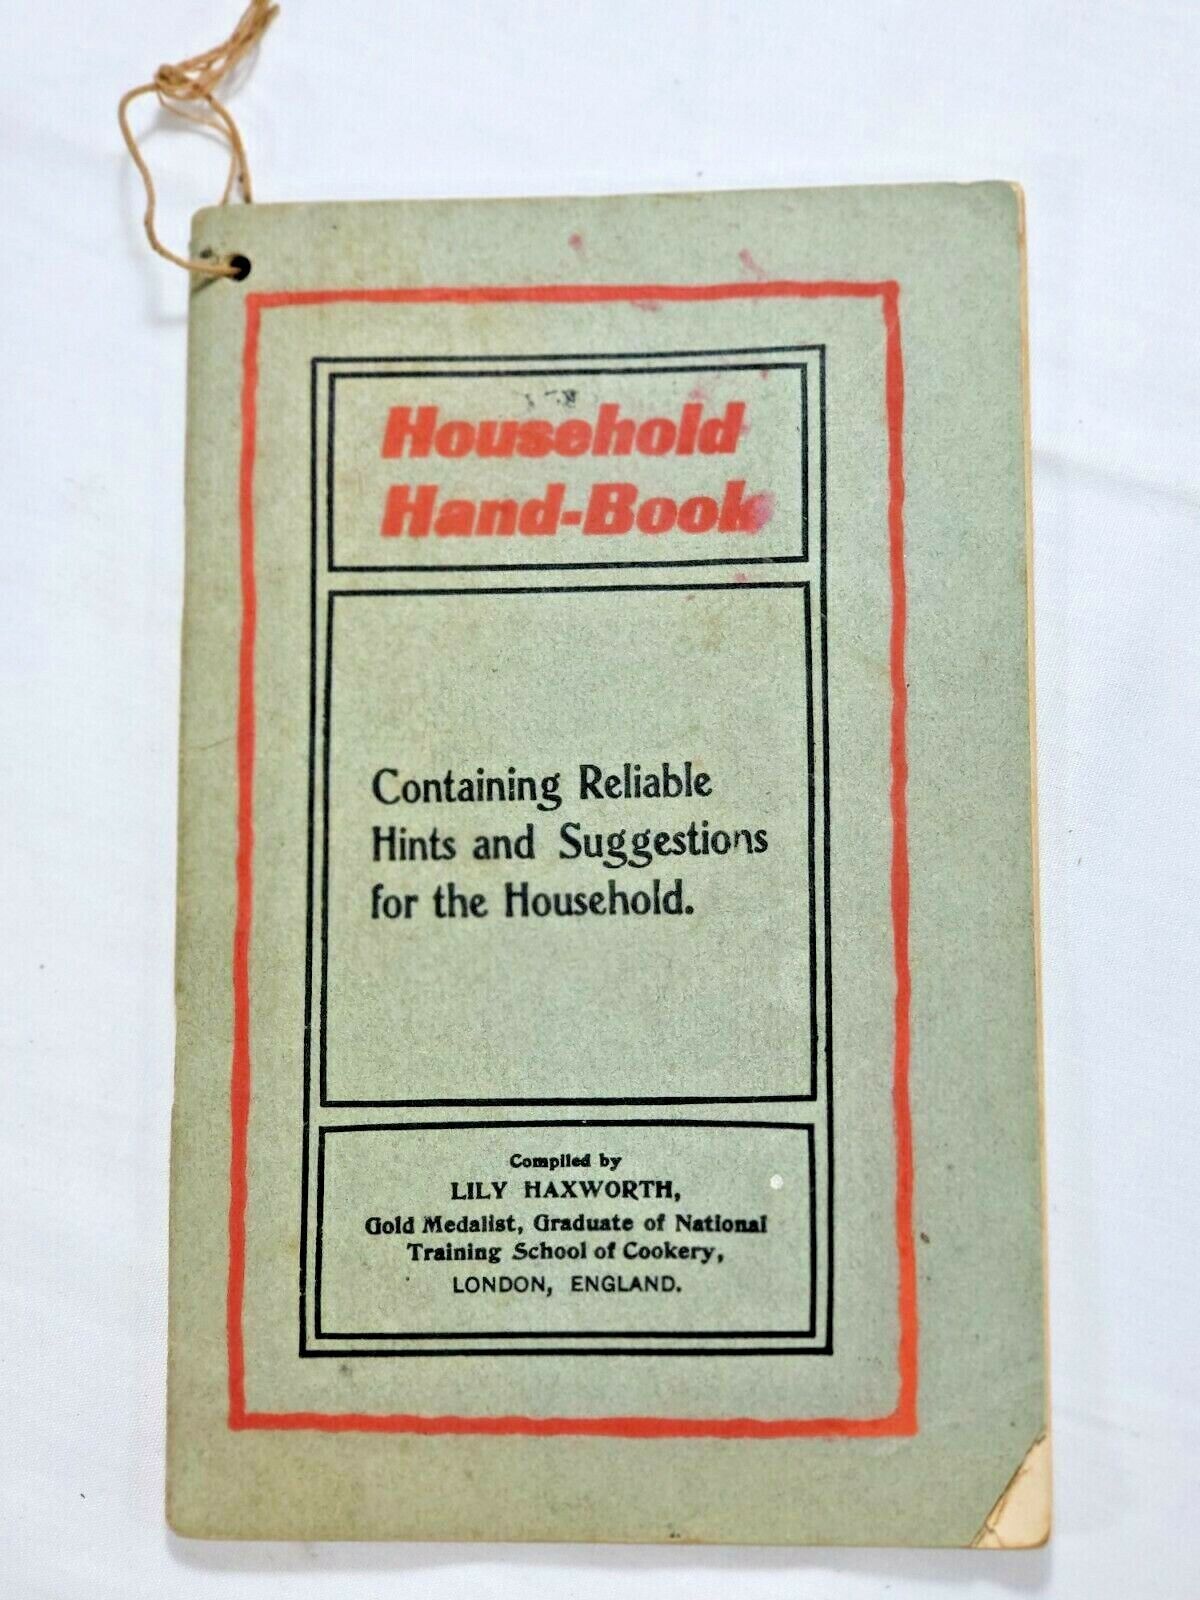 Rare Antique Rumford Household Hand-Book - Hints & Suggestions for Households